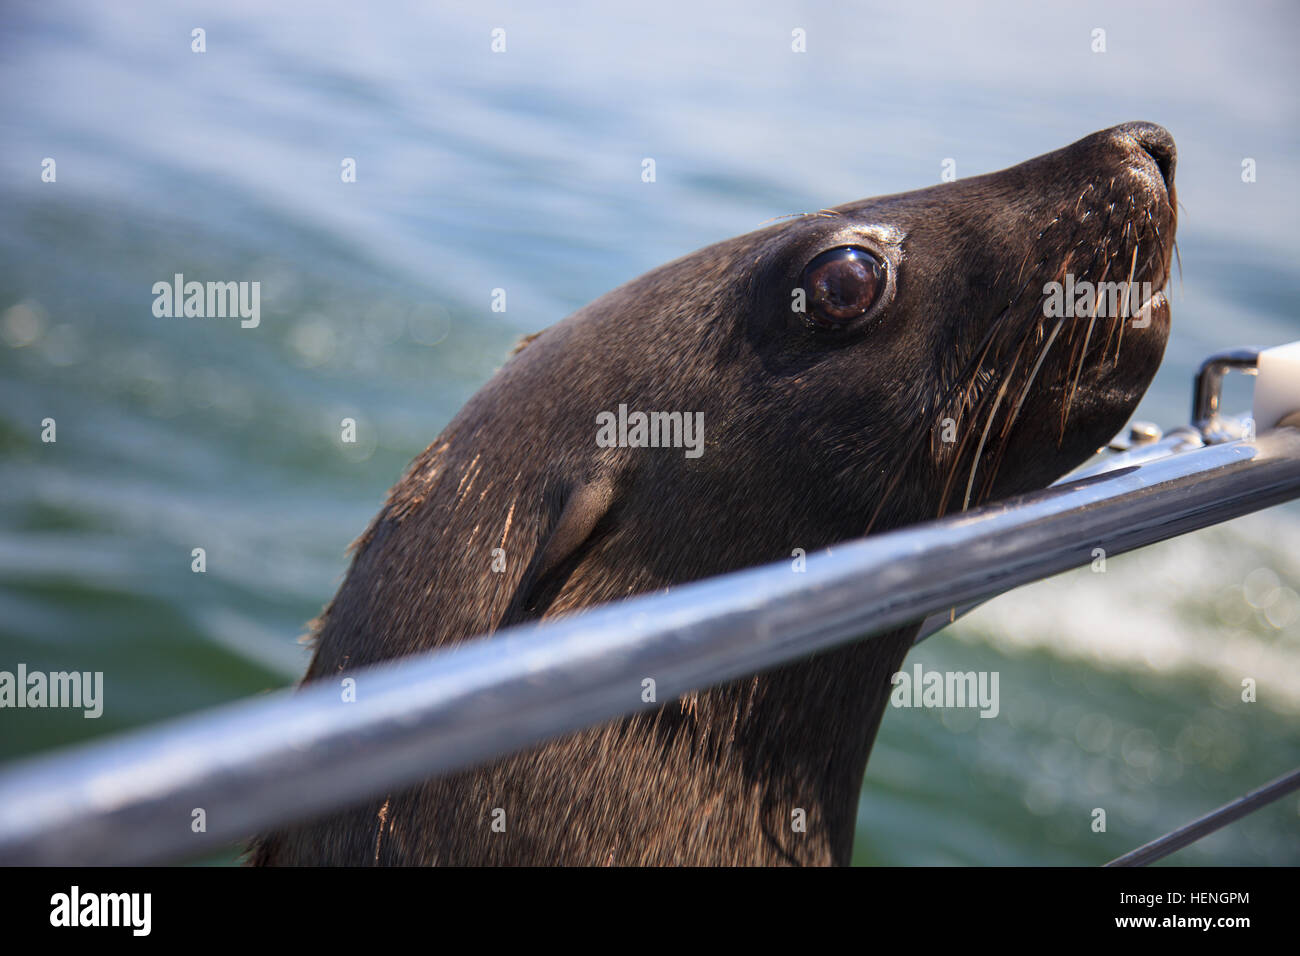 one of huge herd of fur seal swimming near the shore of skeletons in the Atlantic Ocean, South Africa, Namibia. Stock Photo